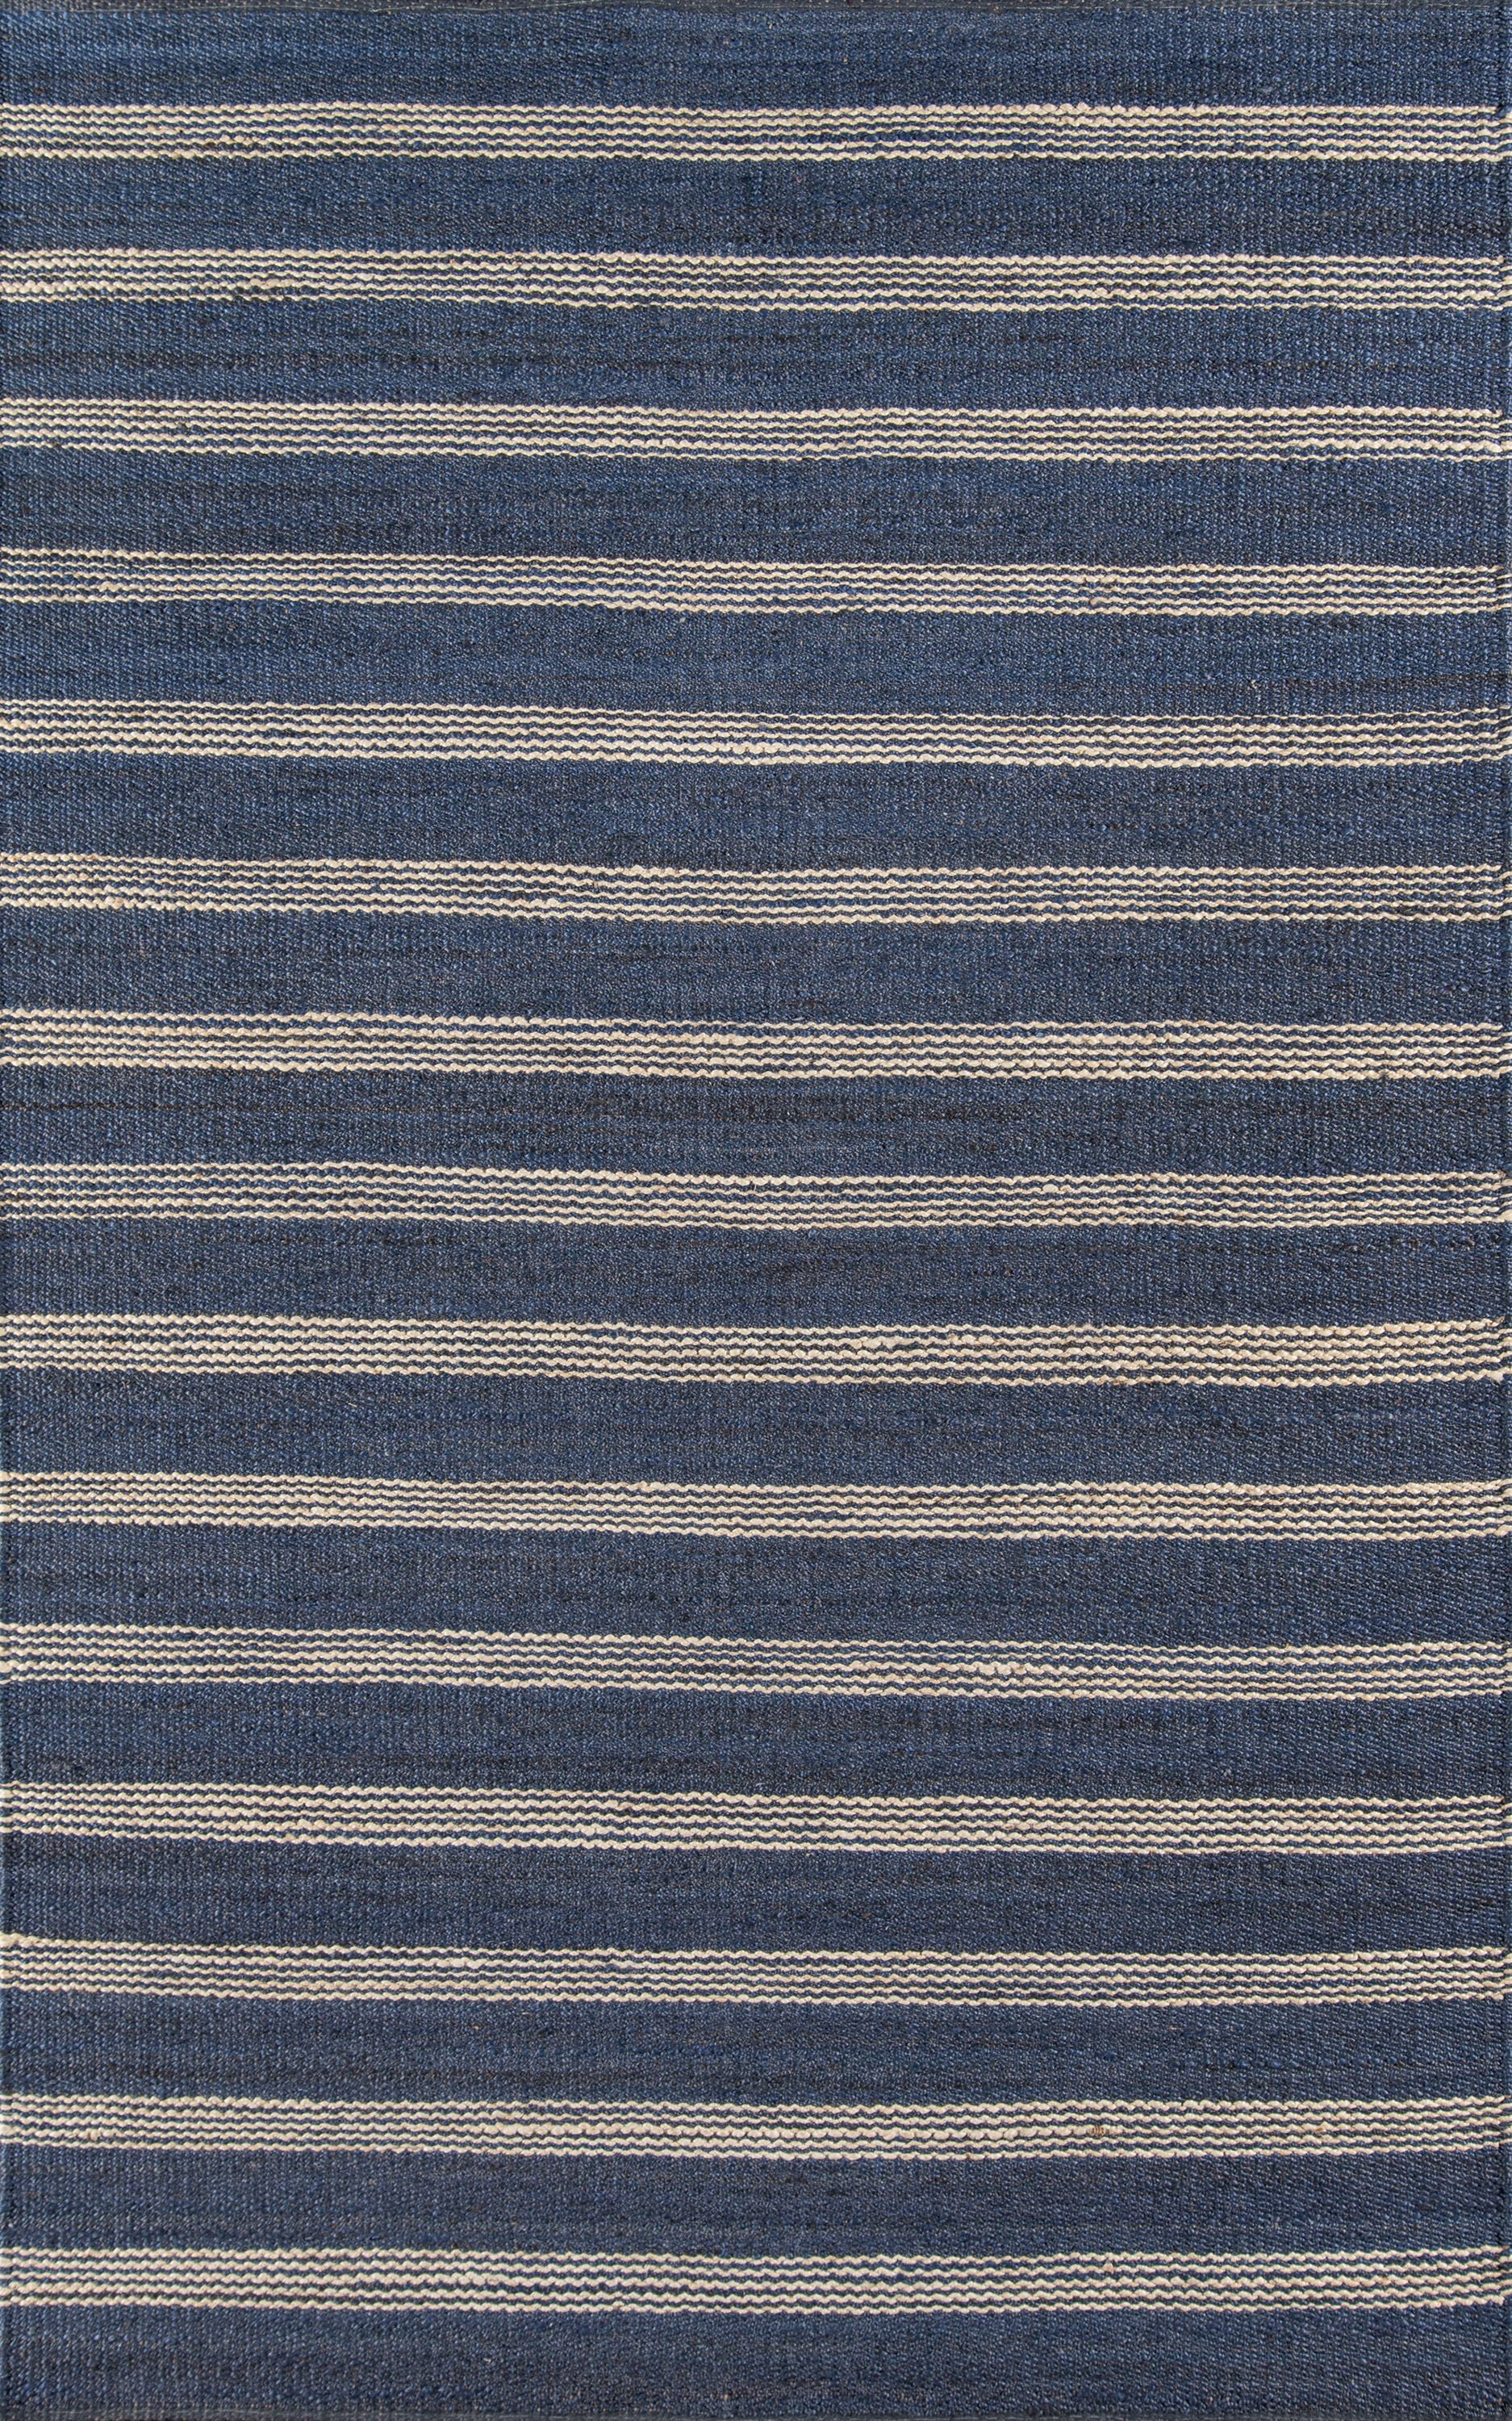 Details about   Nautical Lighthouse Rug 